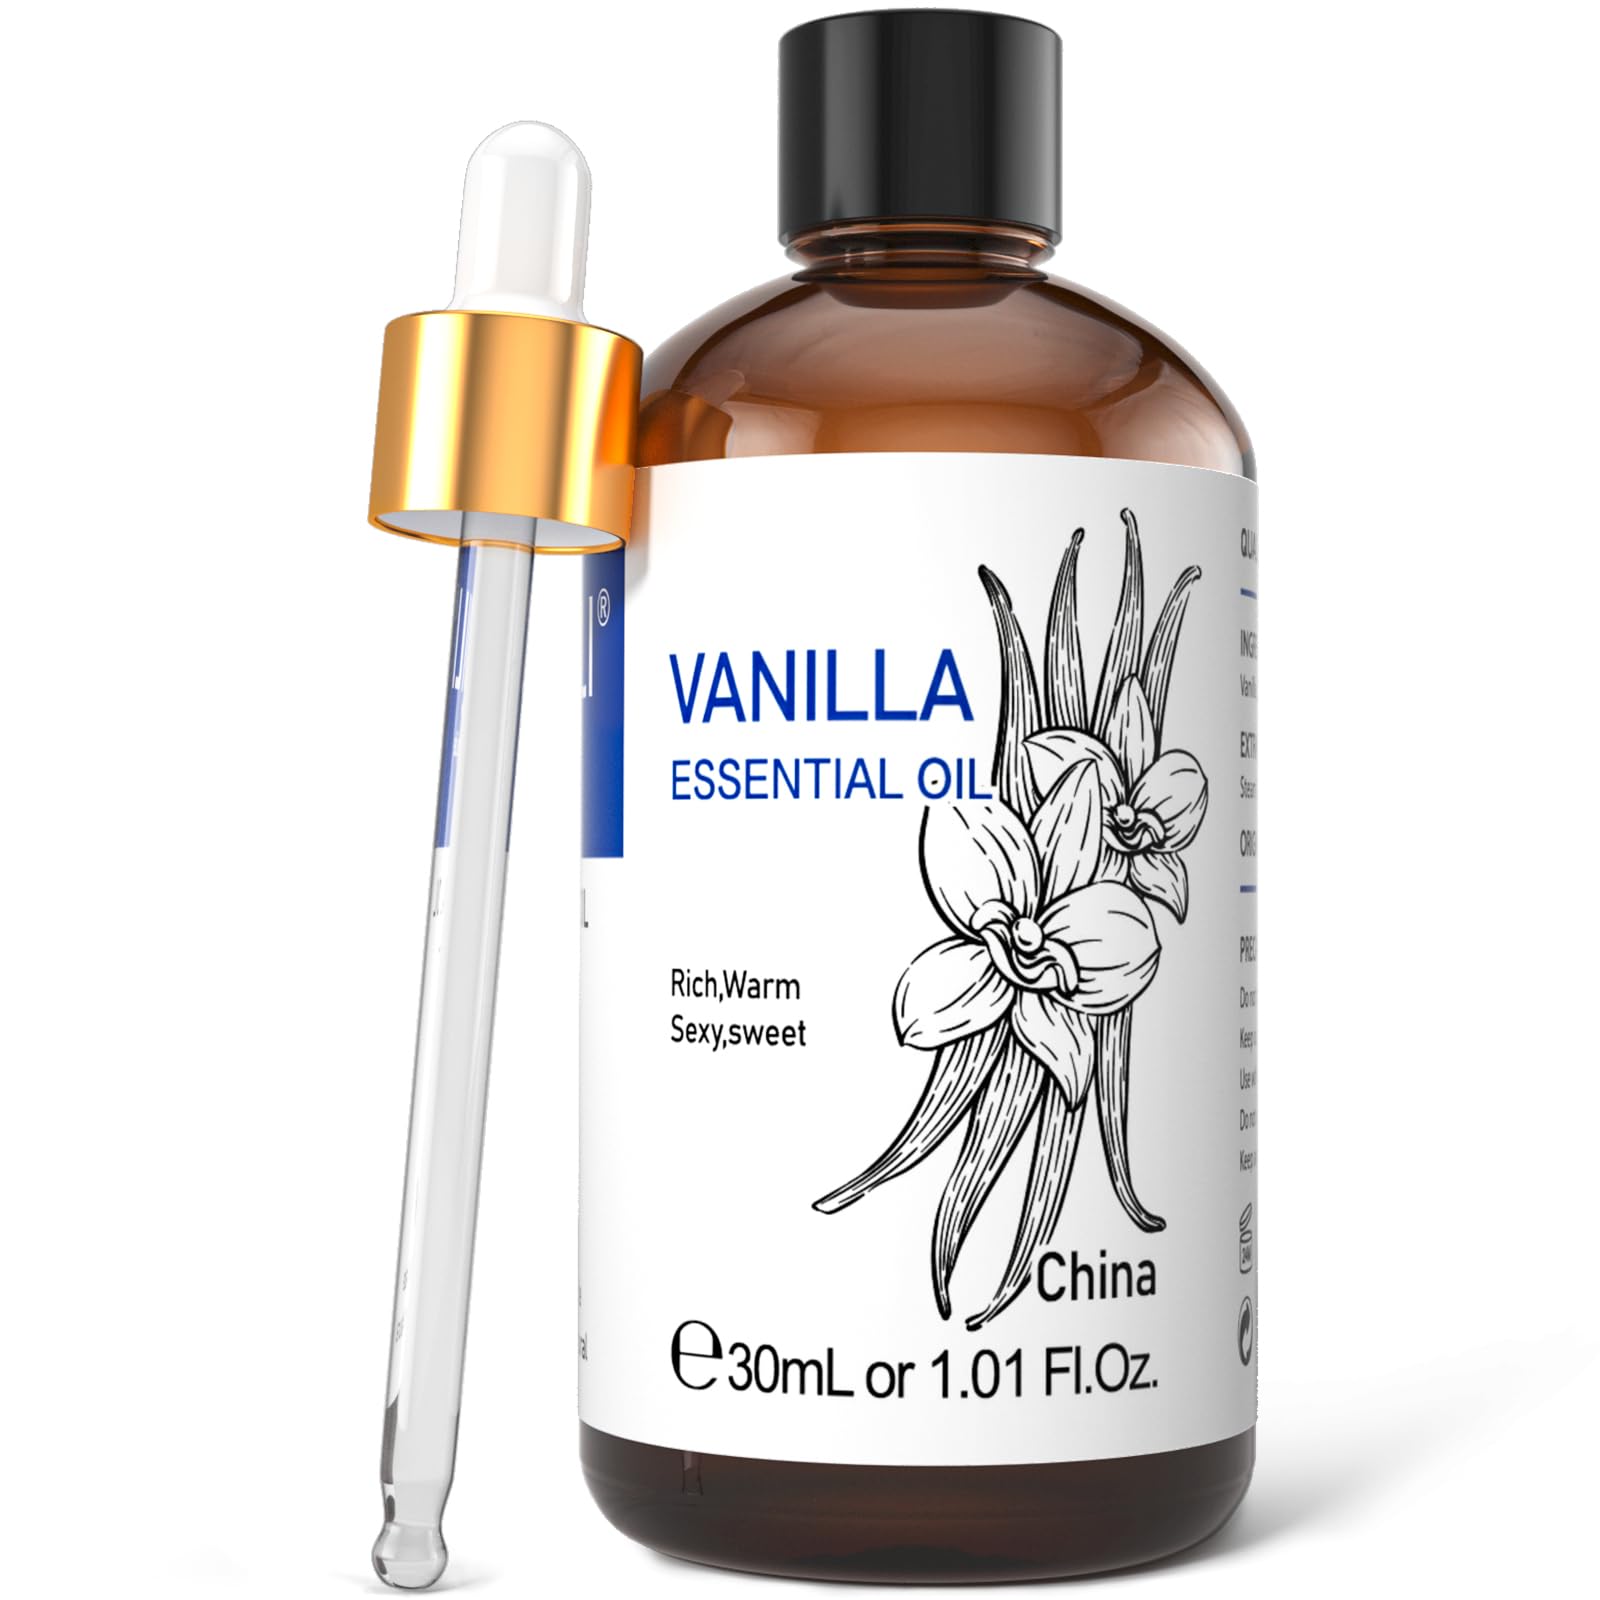 HIQILI 100ML Vanilla Essential Oils for Diffuser Humidifier Massage Aromatherapy  Aromatic Oil for Candle/Soap Making Hair Care